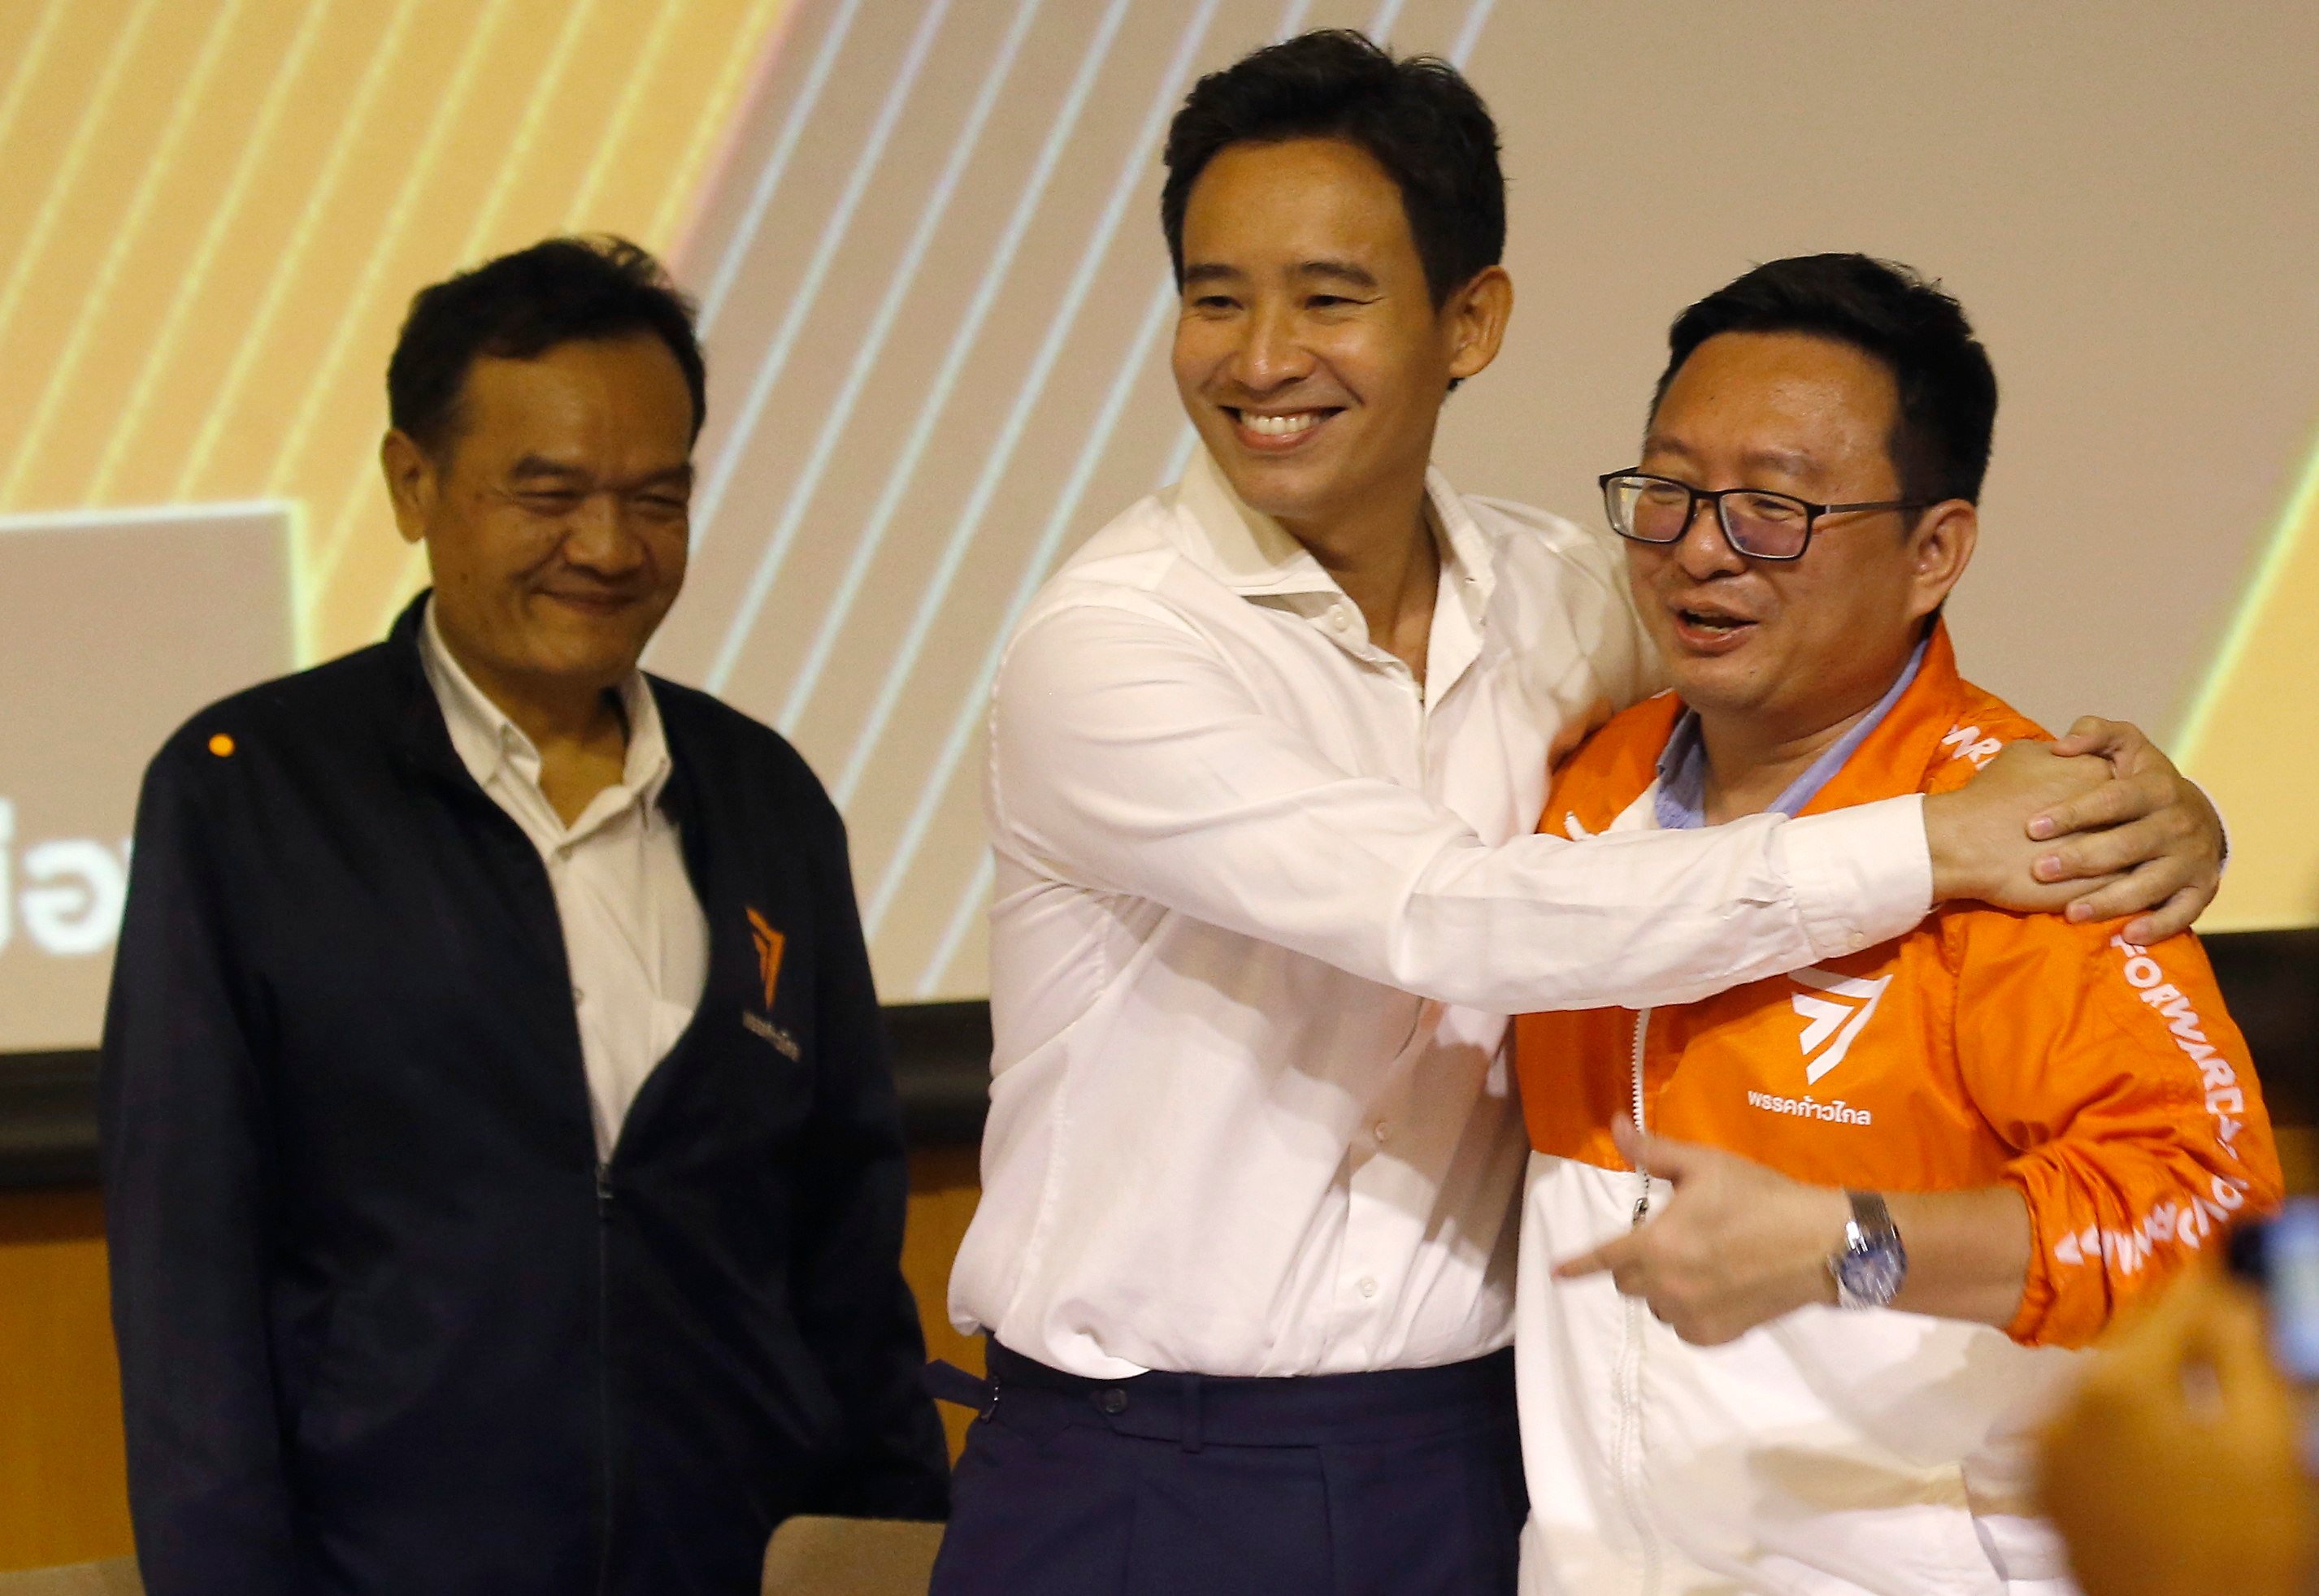 The new leader of the Move Forward Party, Chaithawat Tulathon, right, is congratulated by the chairman of party advisory committee Pita Limjaroenrat after he won a vote for the new party leadership during the party’s meeting in Bangkok. Photo: EPA-EFE